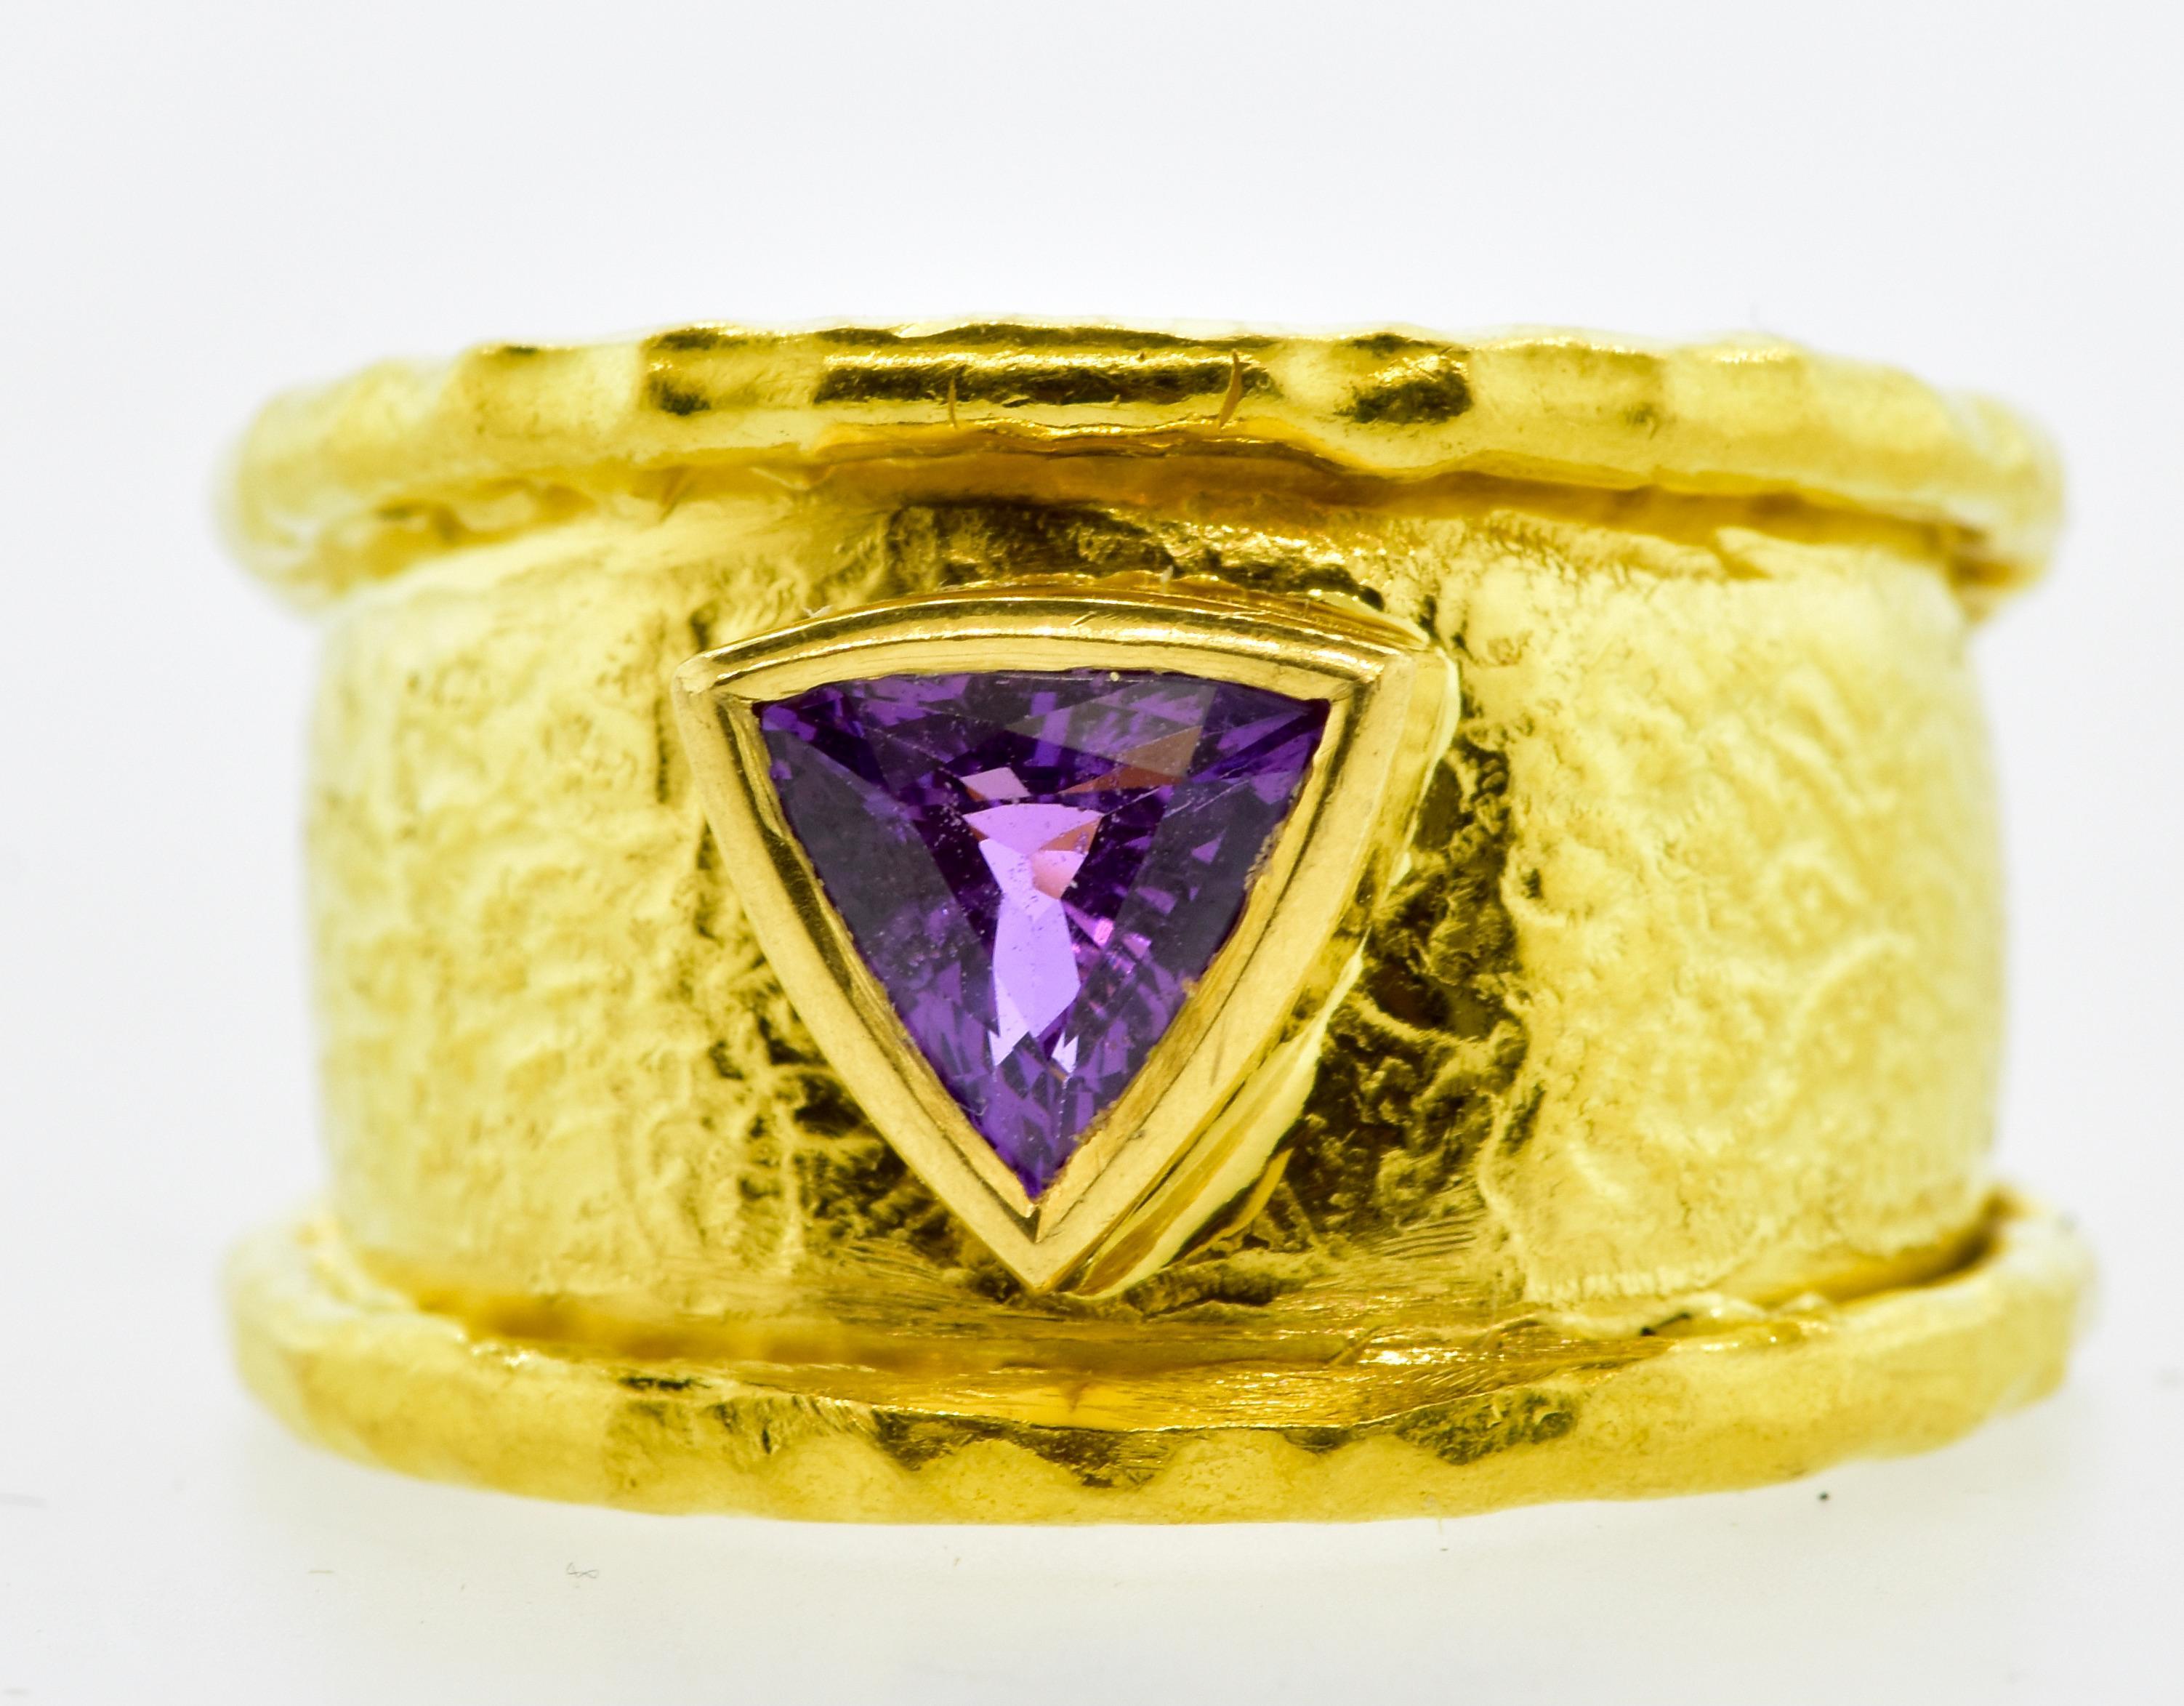 Jean Mahie 22K hand made ring centering a fine natural fancy cut purple sapphire. The triangle cut sapphire weighs approximately 1 ct. This hand hammered ring is signed and numbered by the fine French firm Jean Mahie. One can see similar rings on